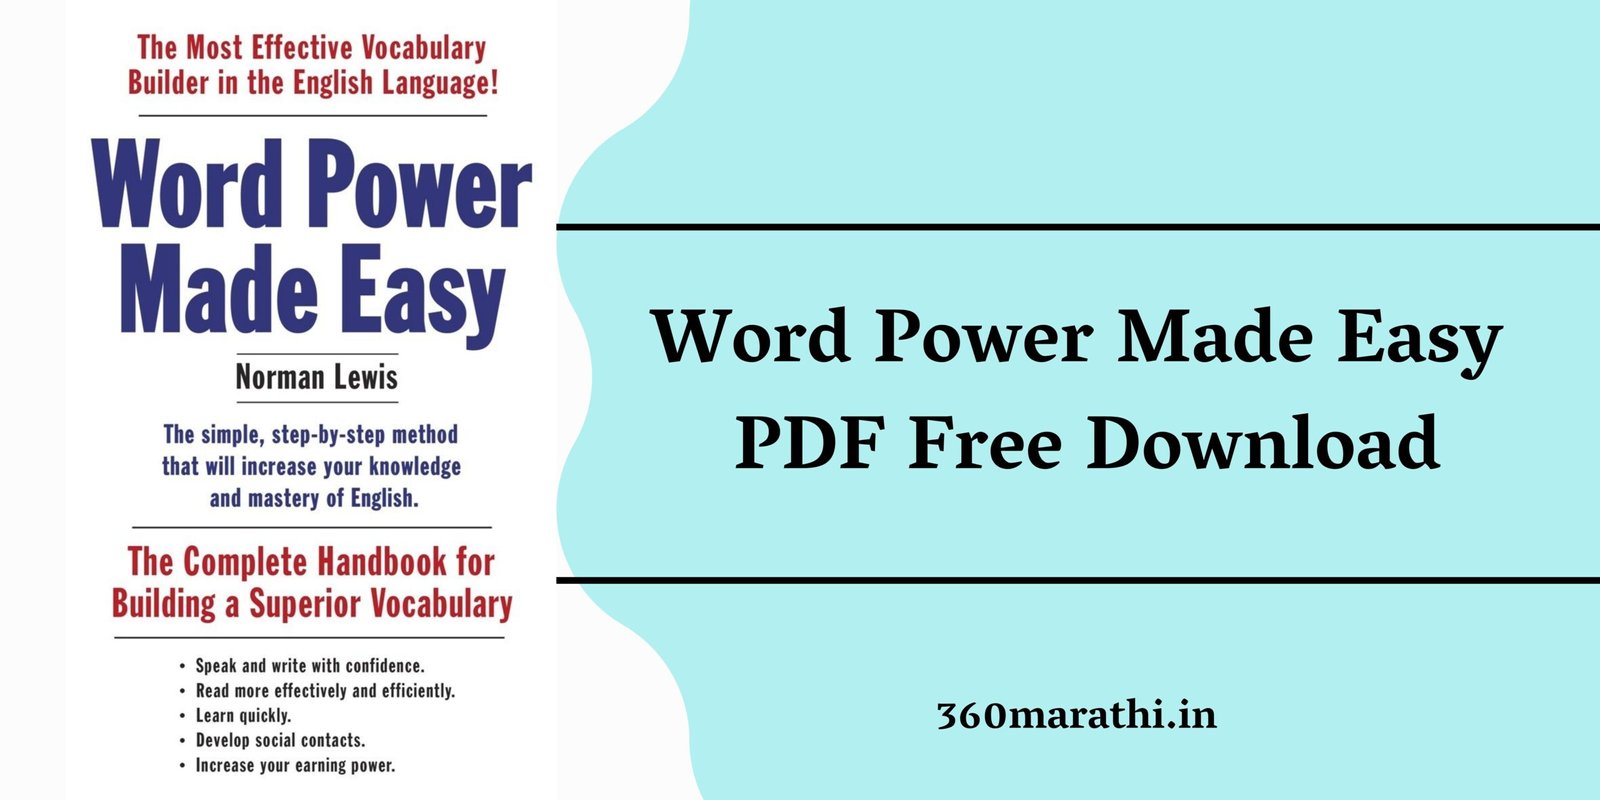 Word Power Made Easy PDF Free Download